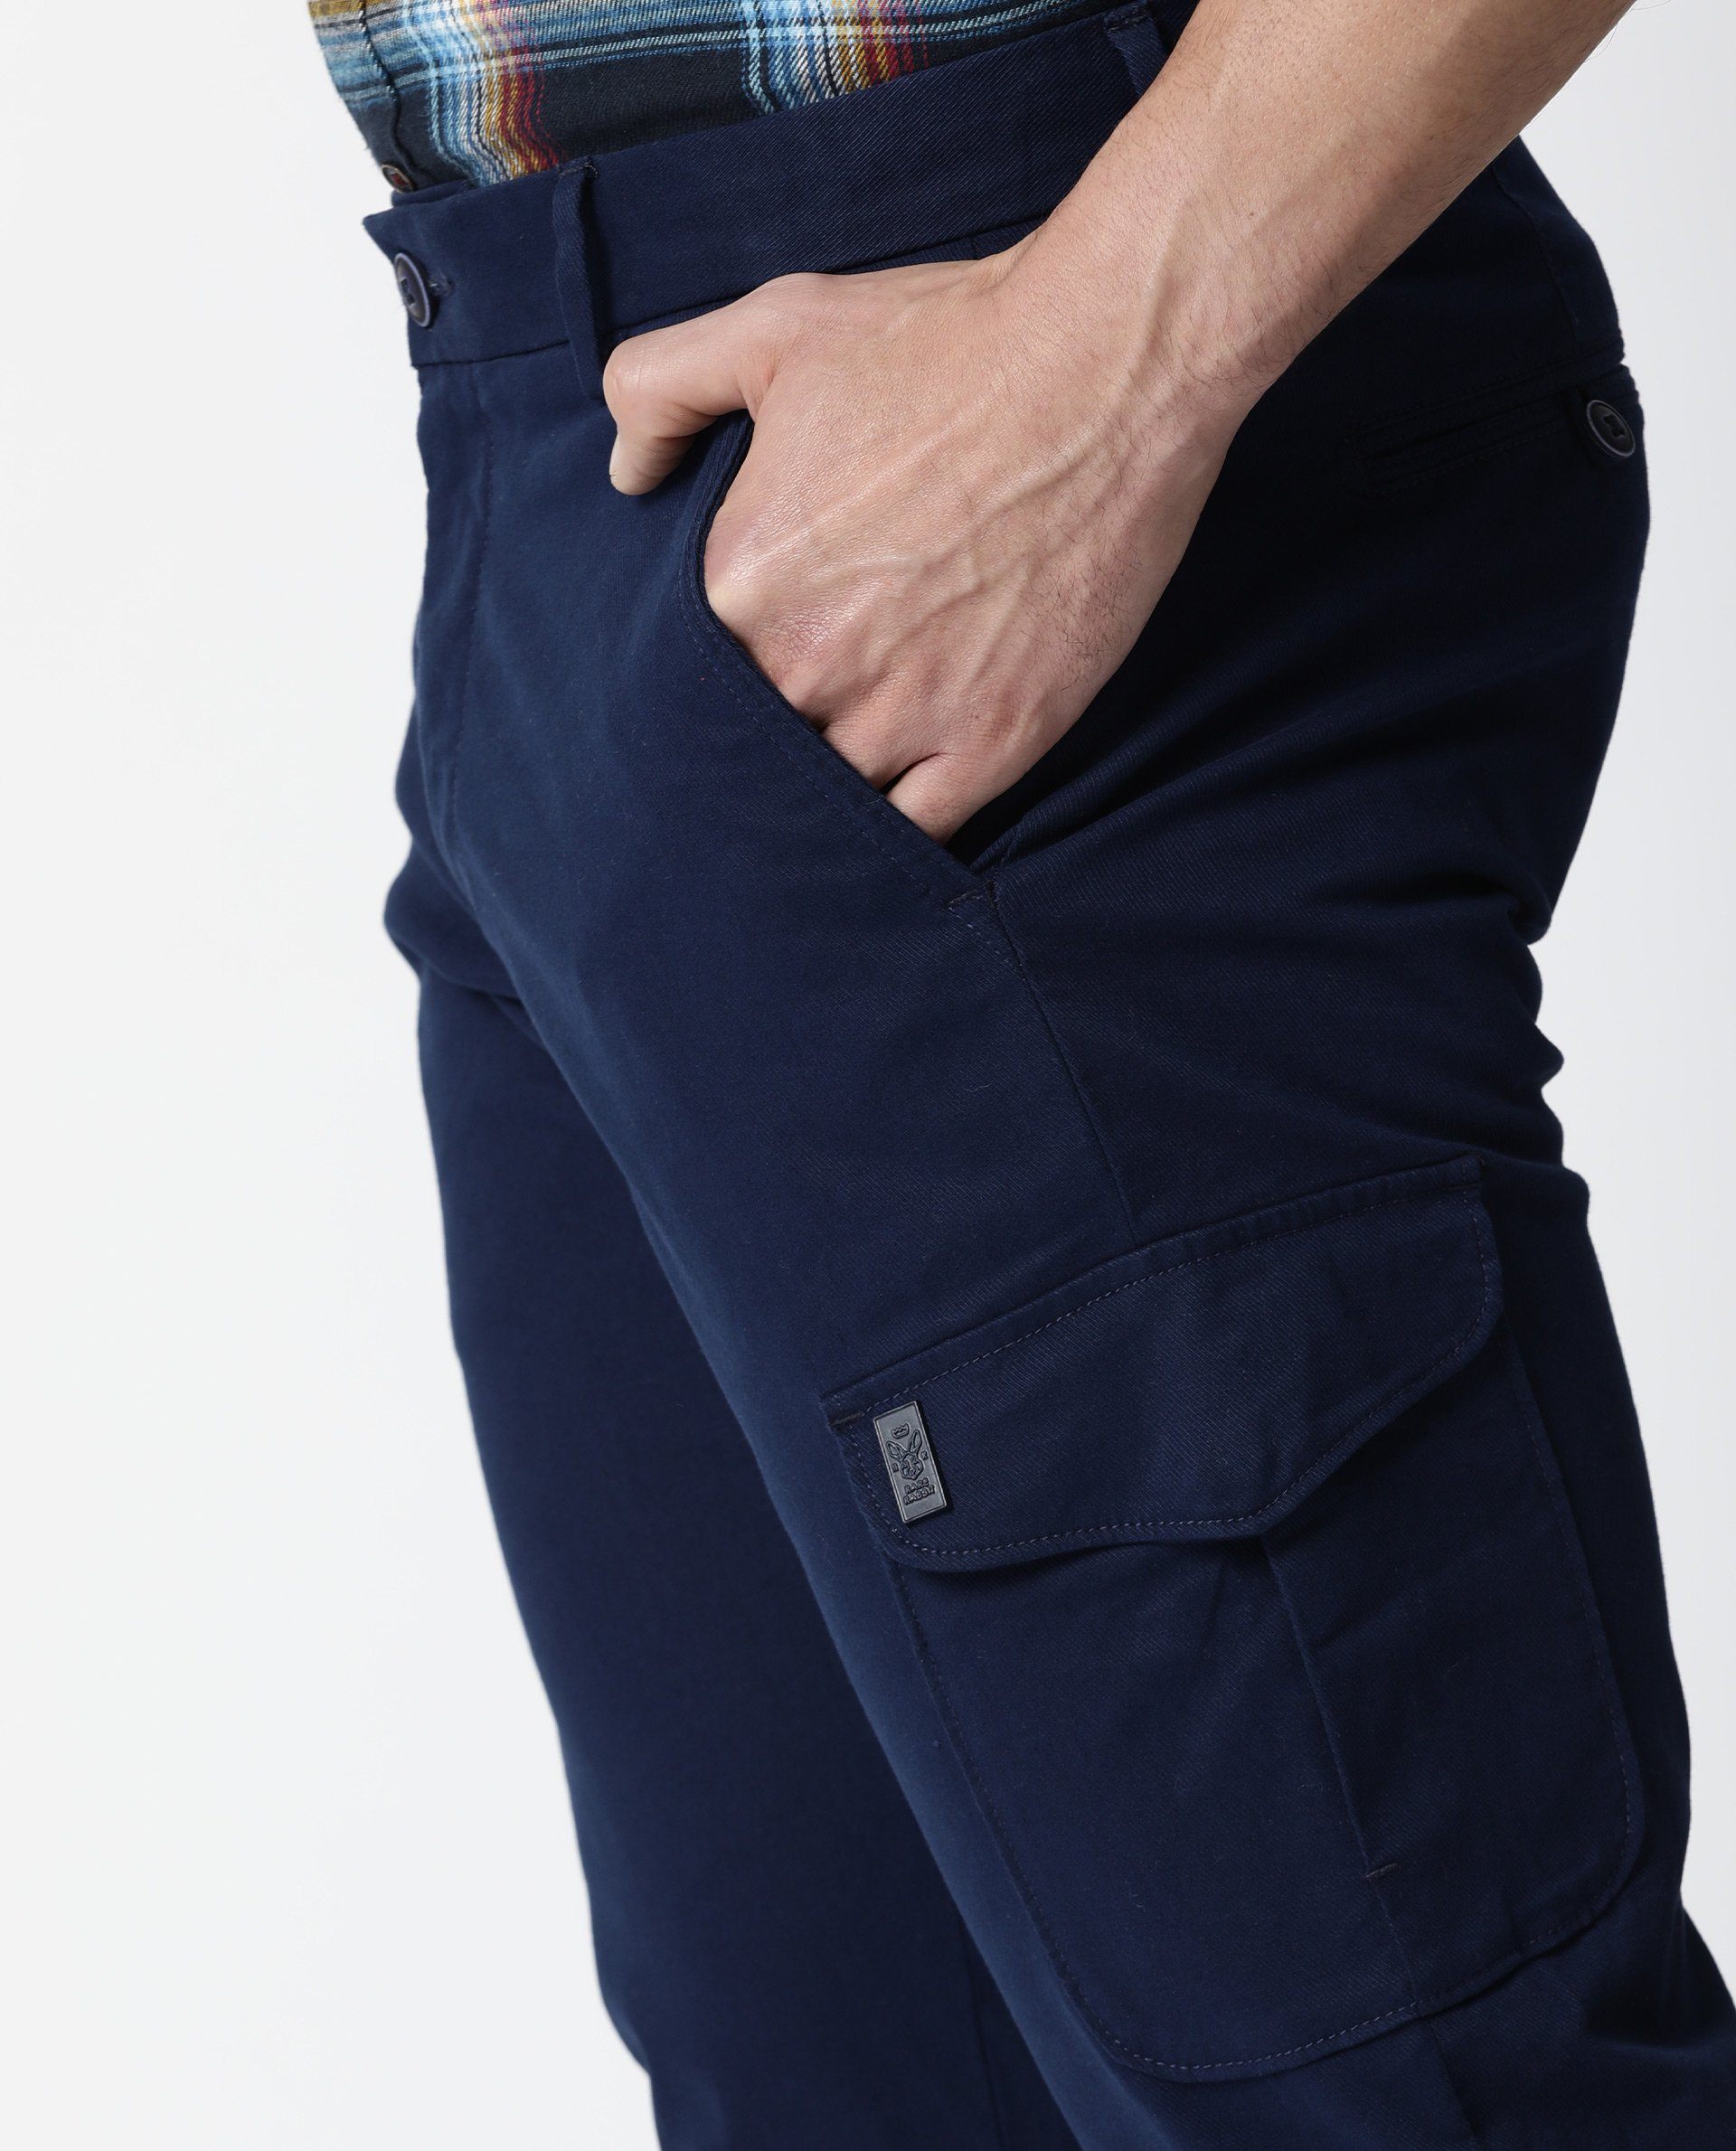 Buy Flying Machine Solid Twill Cargo Trousers - NNNOW.com